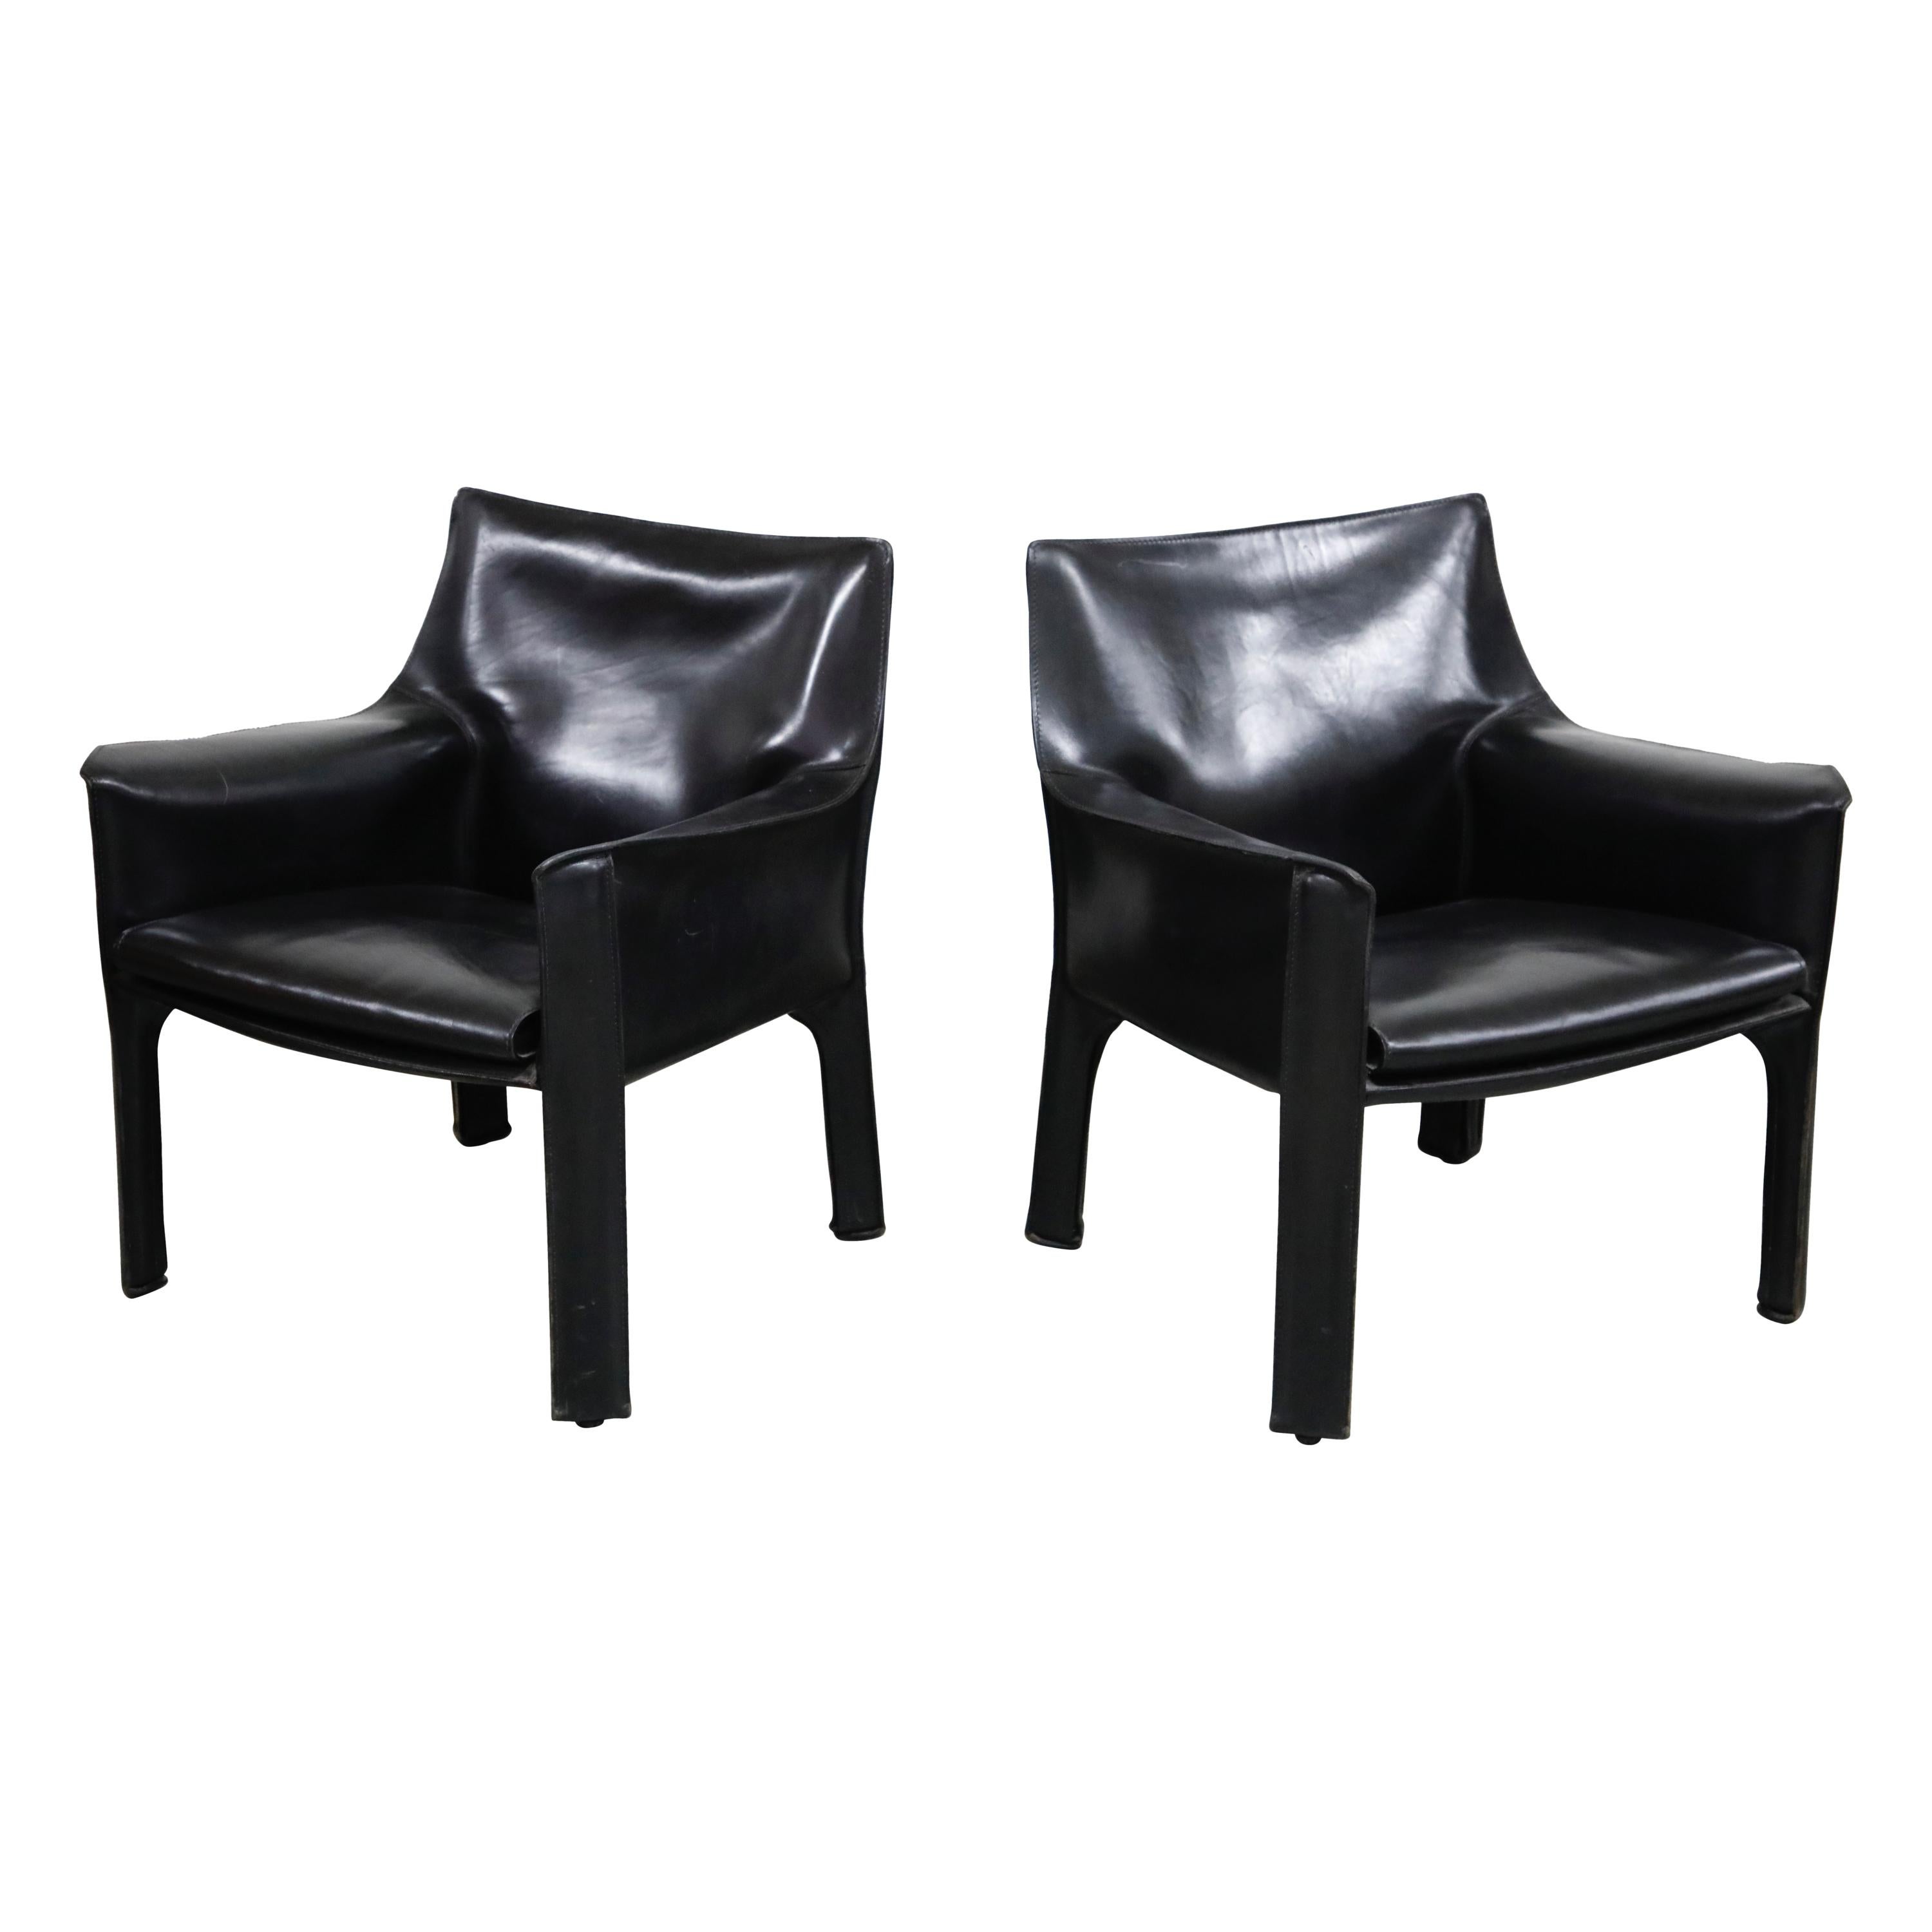 Pair of Mario Bellini for Cassina "Cab 414" Lounge Chairs, Signed, circa 1980s